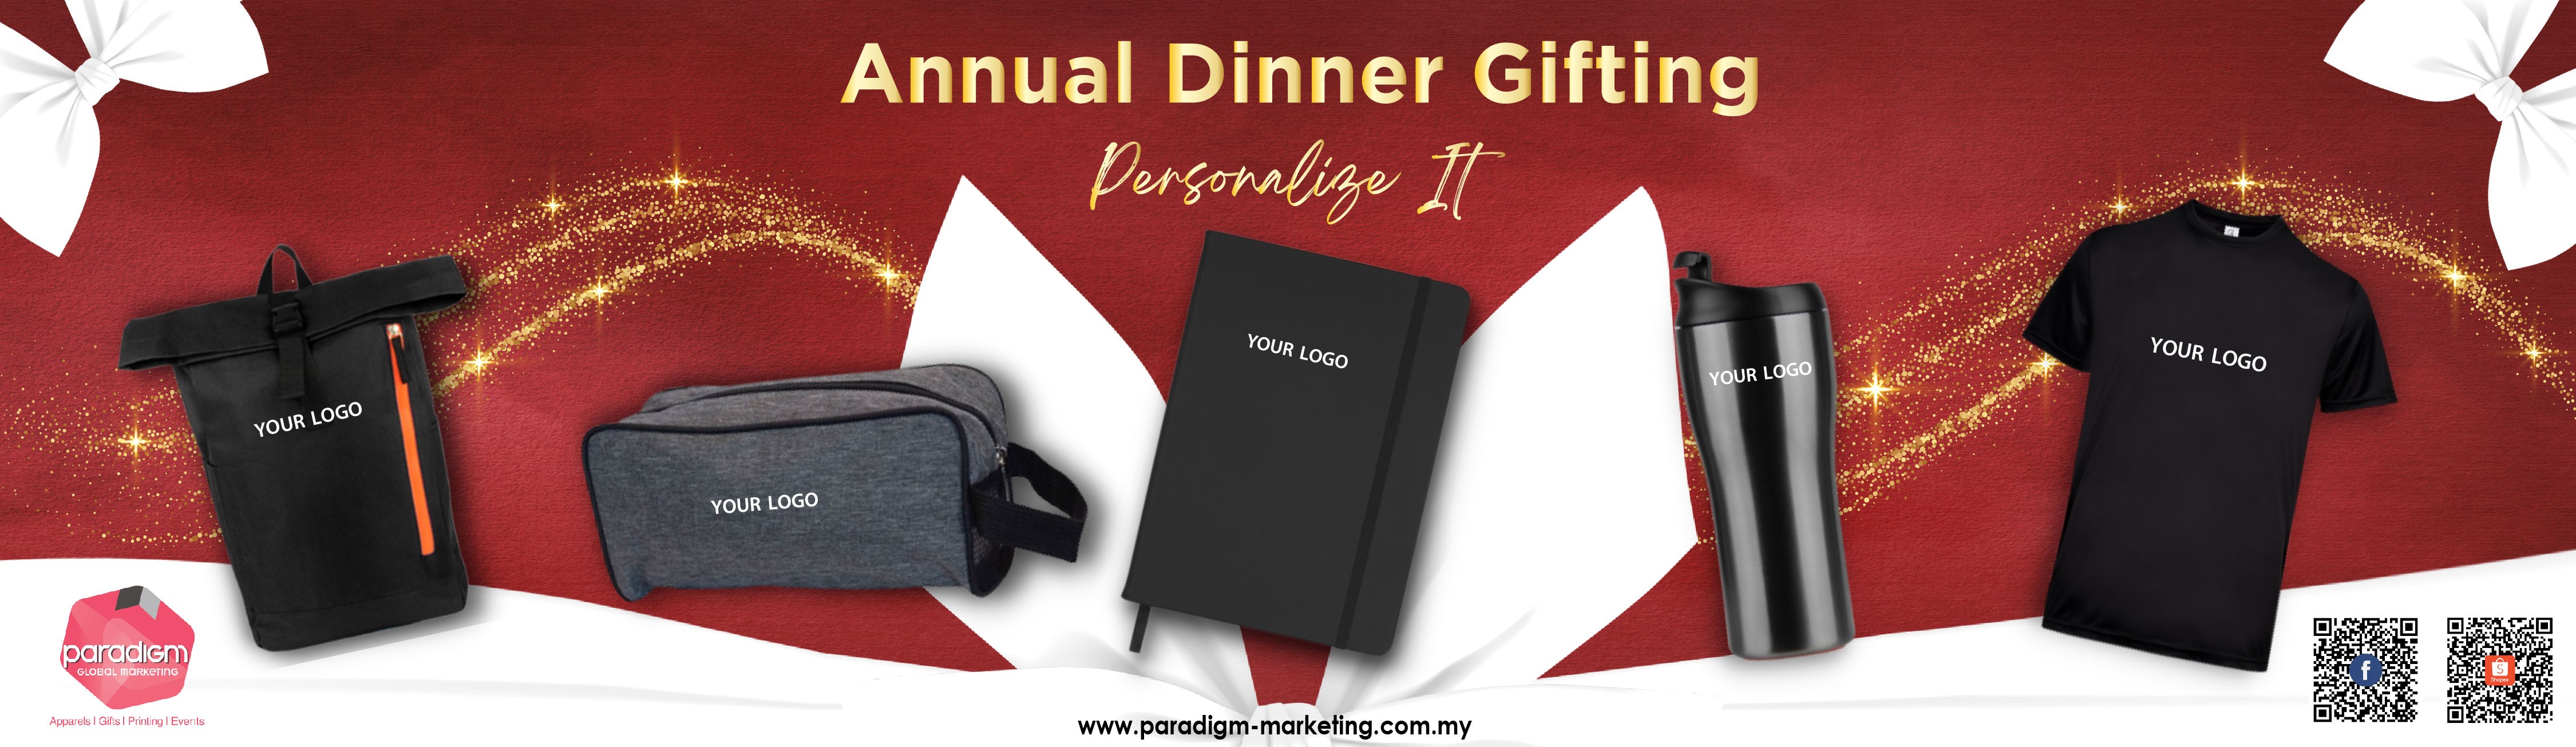 ANNUAL DINNER GIFTING